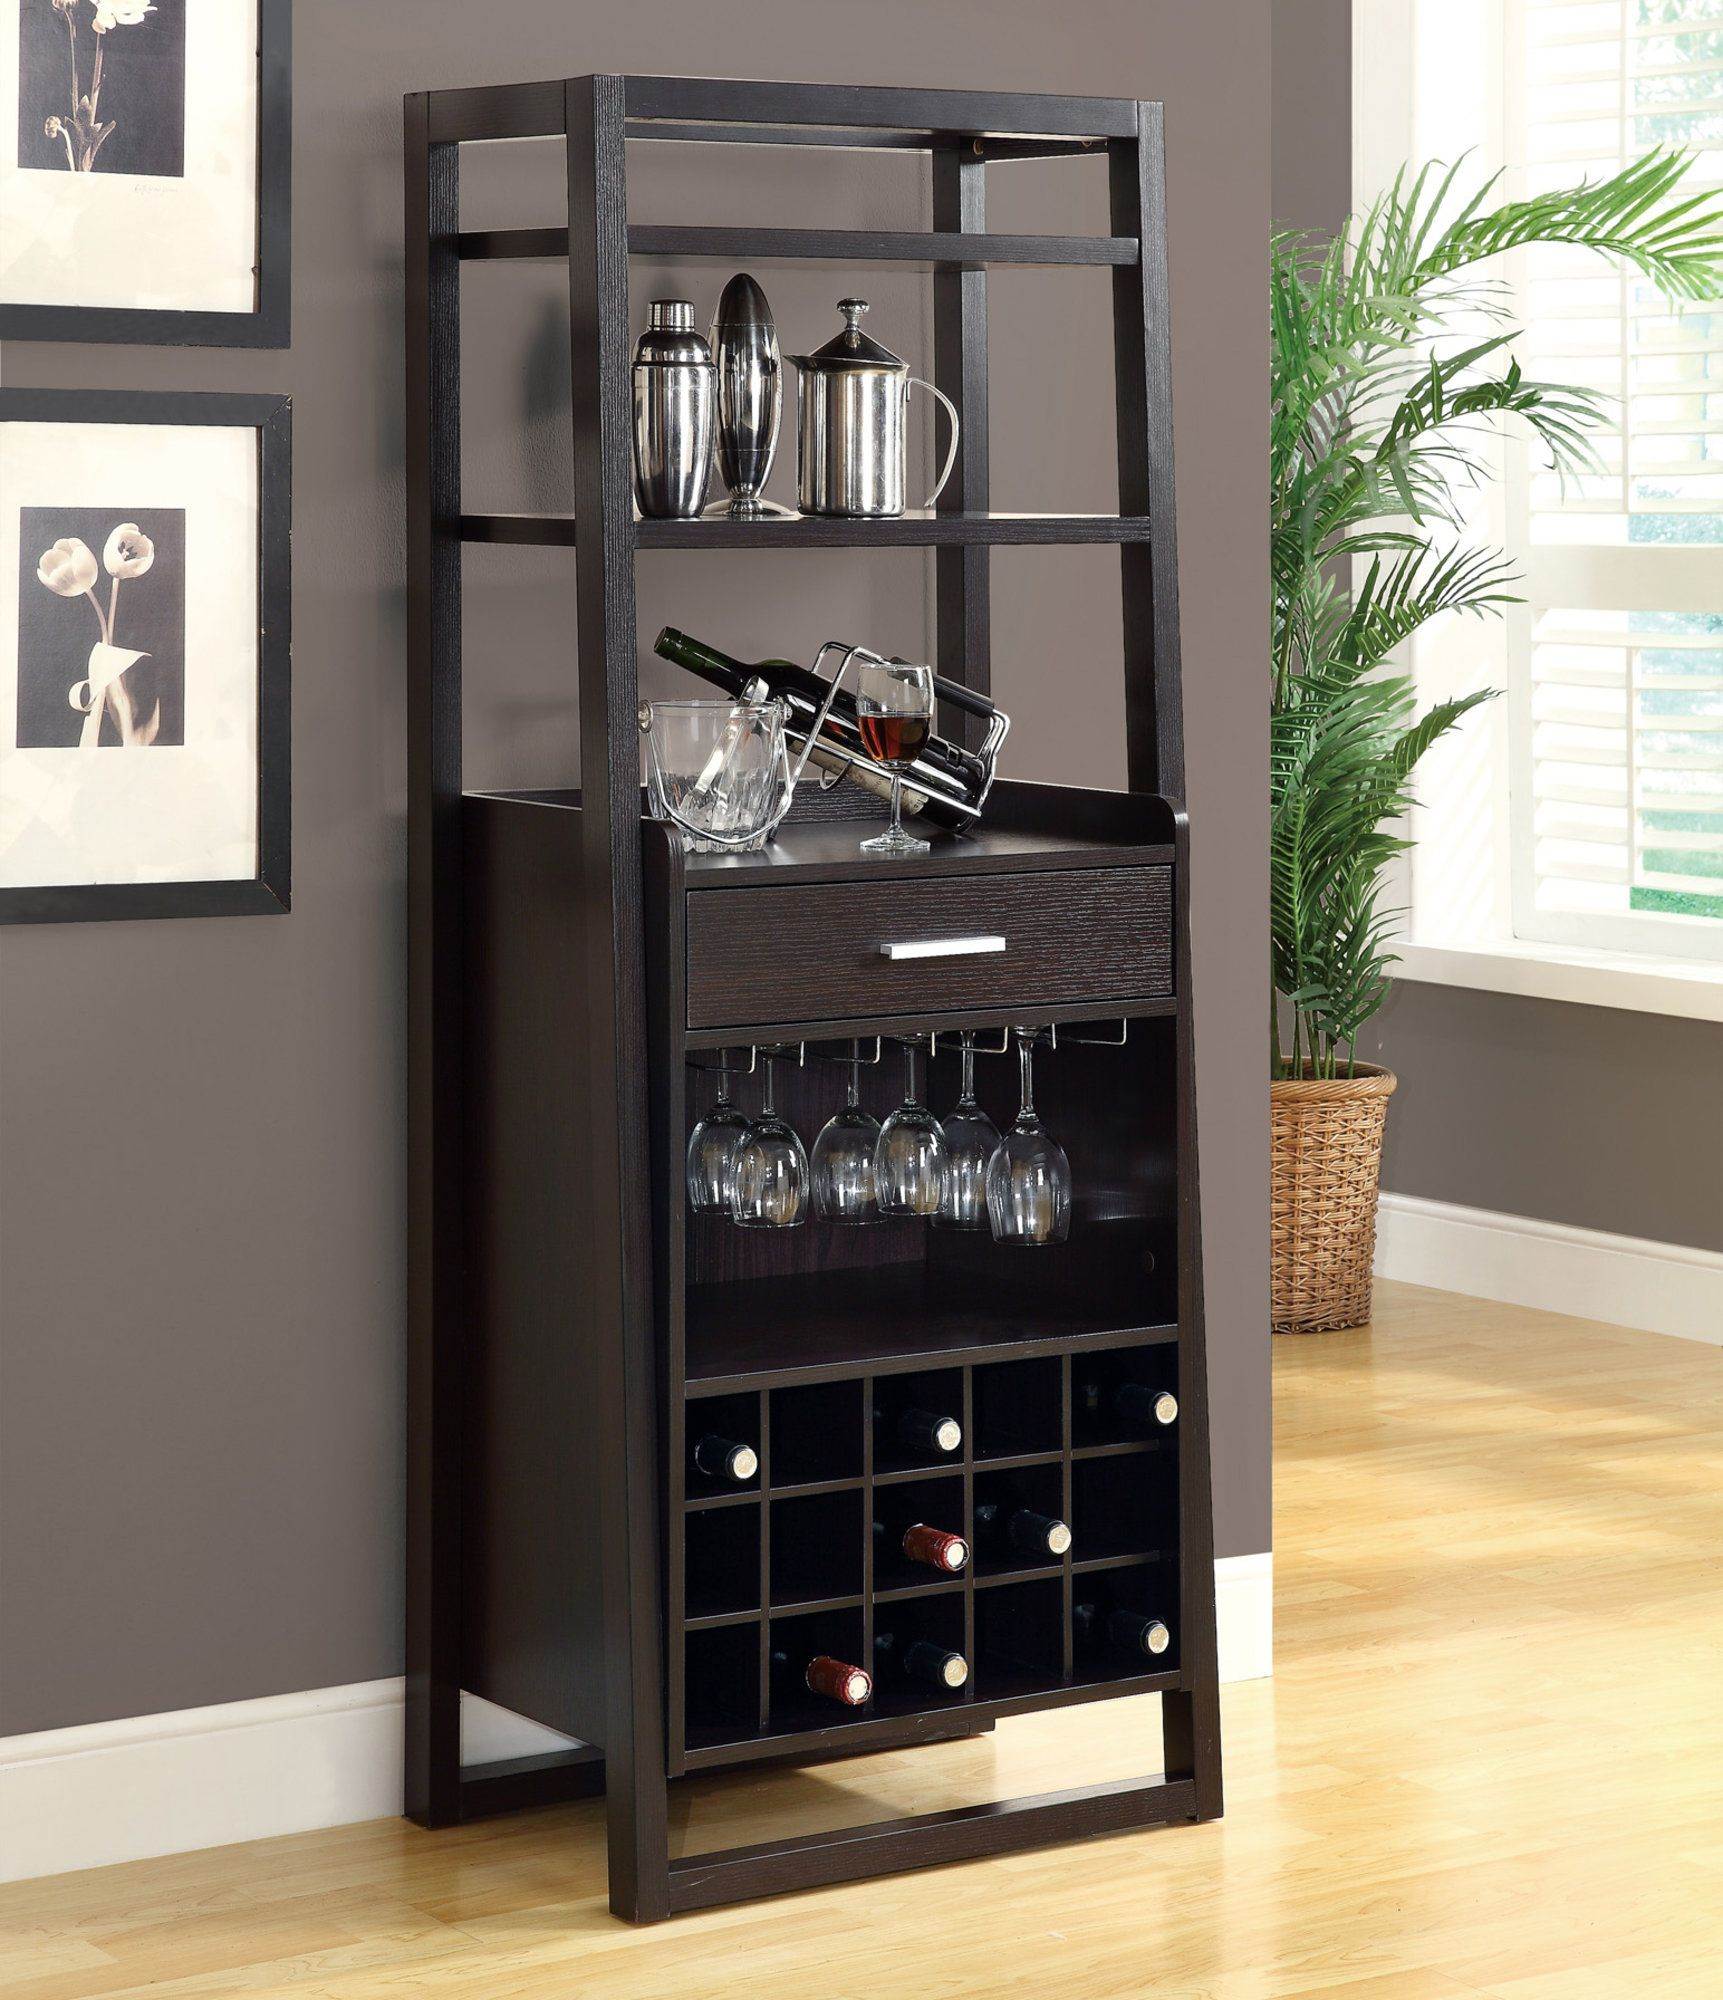 Home Bar Wine Rack Storage Cabinet Laminate Brown Contemporary Modern - image 2 of 5